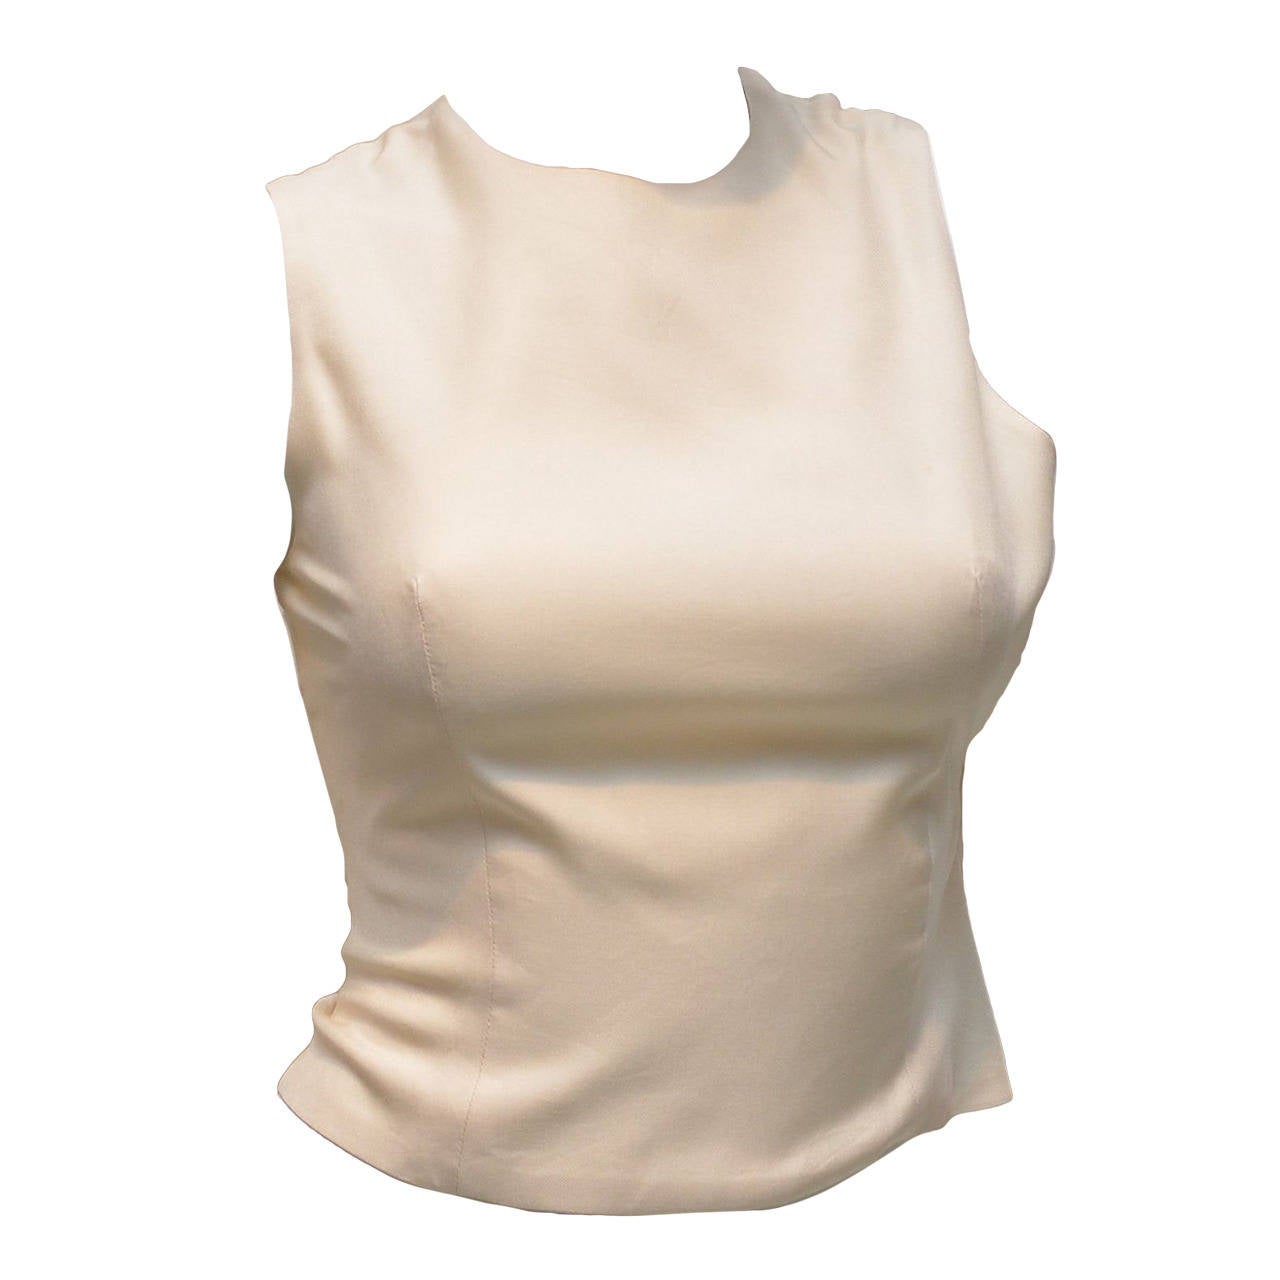 Vintage 2002 Gianni Versace silk top is made with 100% silk, side zipper closure and back lace up tie closure with silver metal eyes. Top is fully lined and is a size 38 made in Italy.

Measurements: Flexible due to lacing
Bust - 32''
Length -